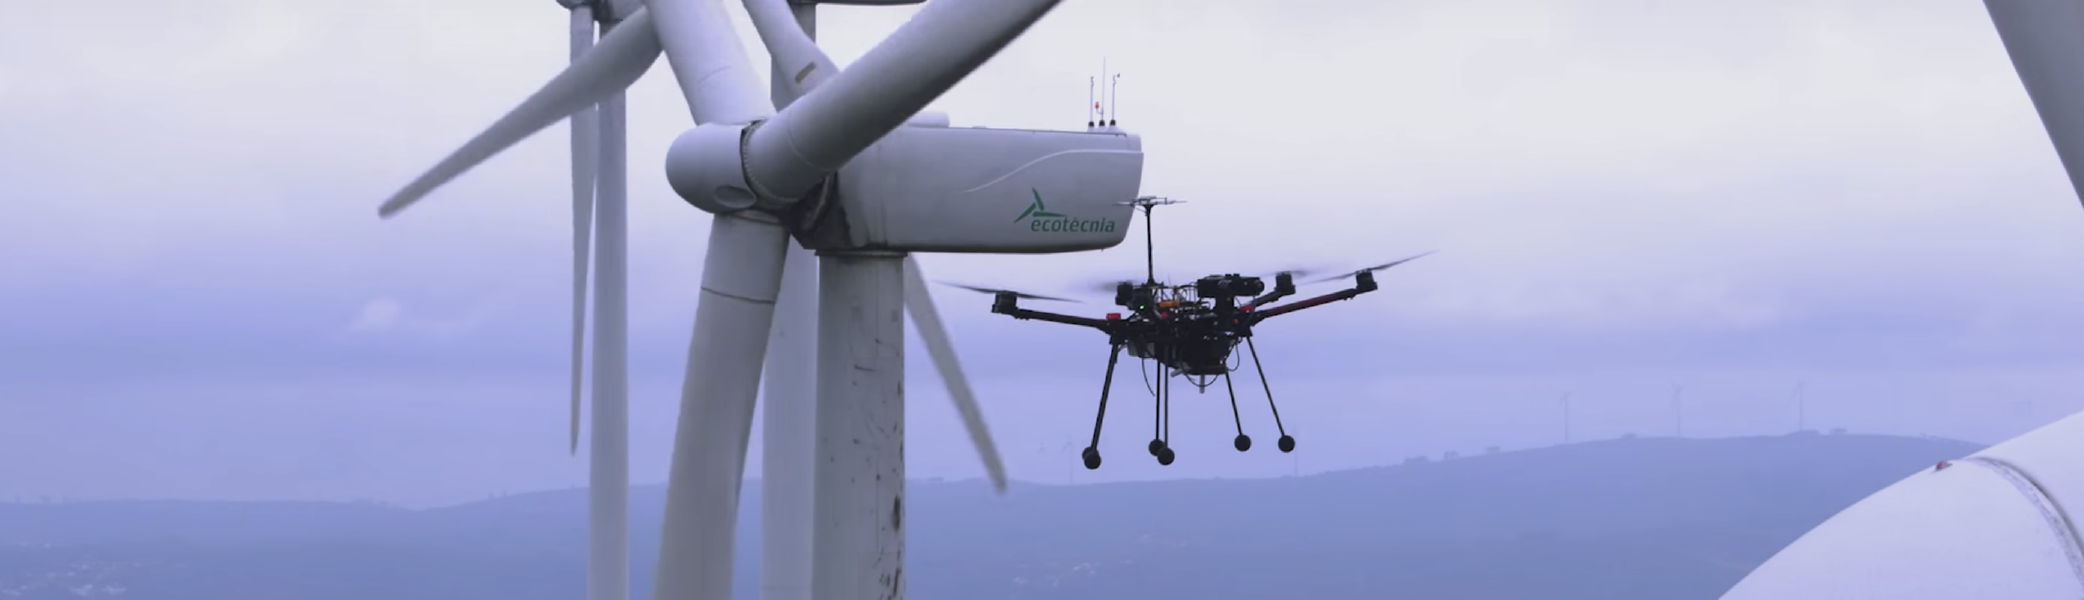 Customizable drone for inspection of electrical assets